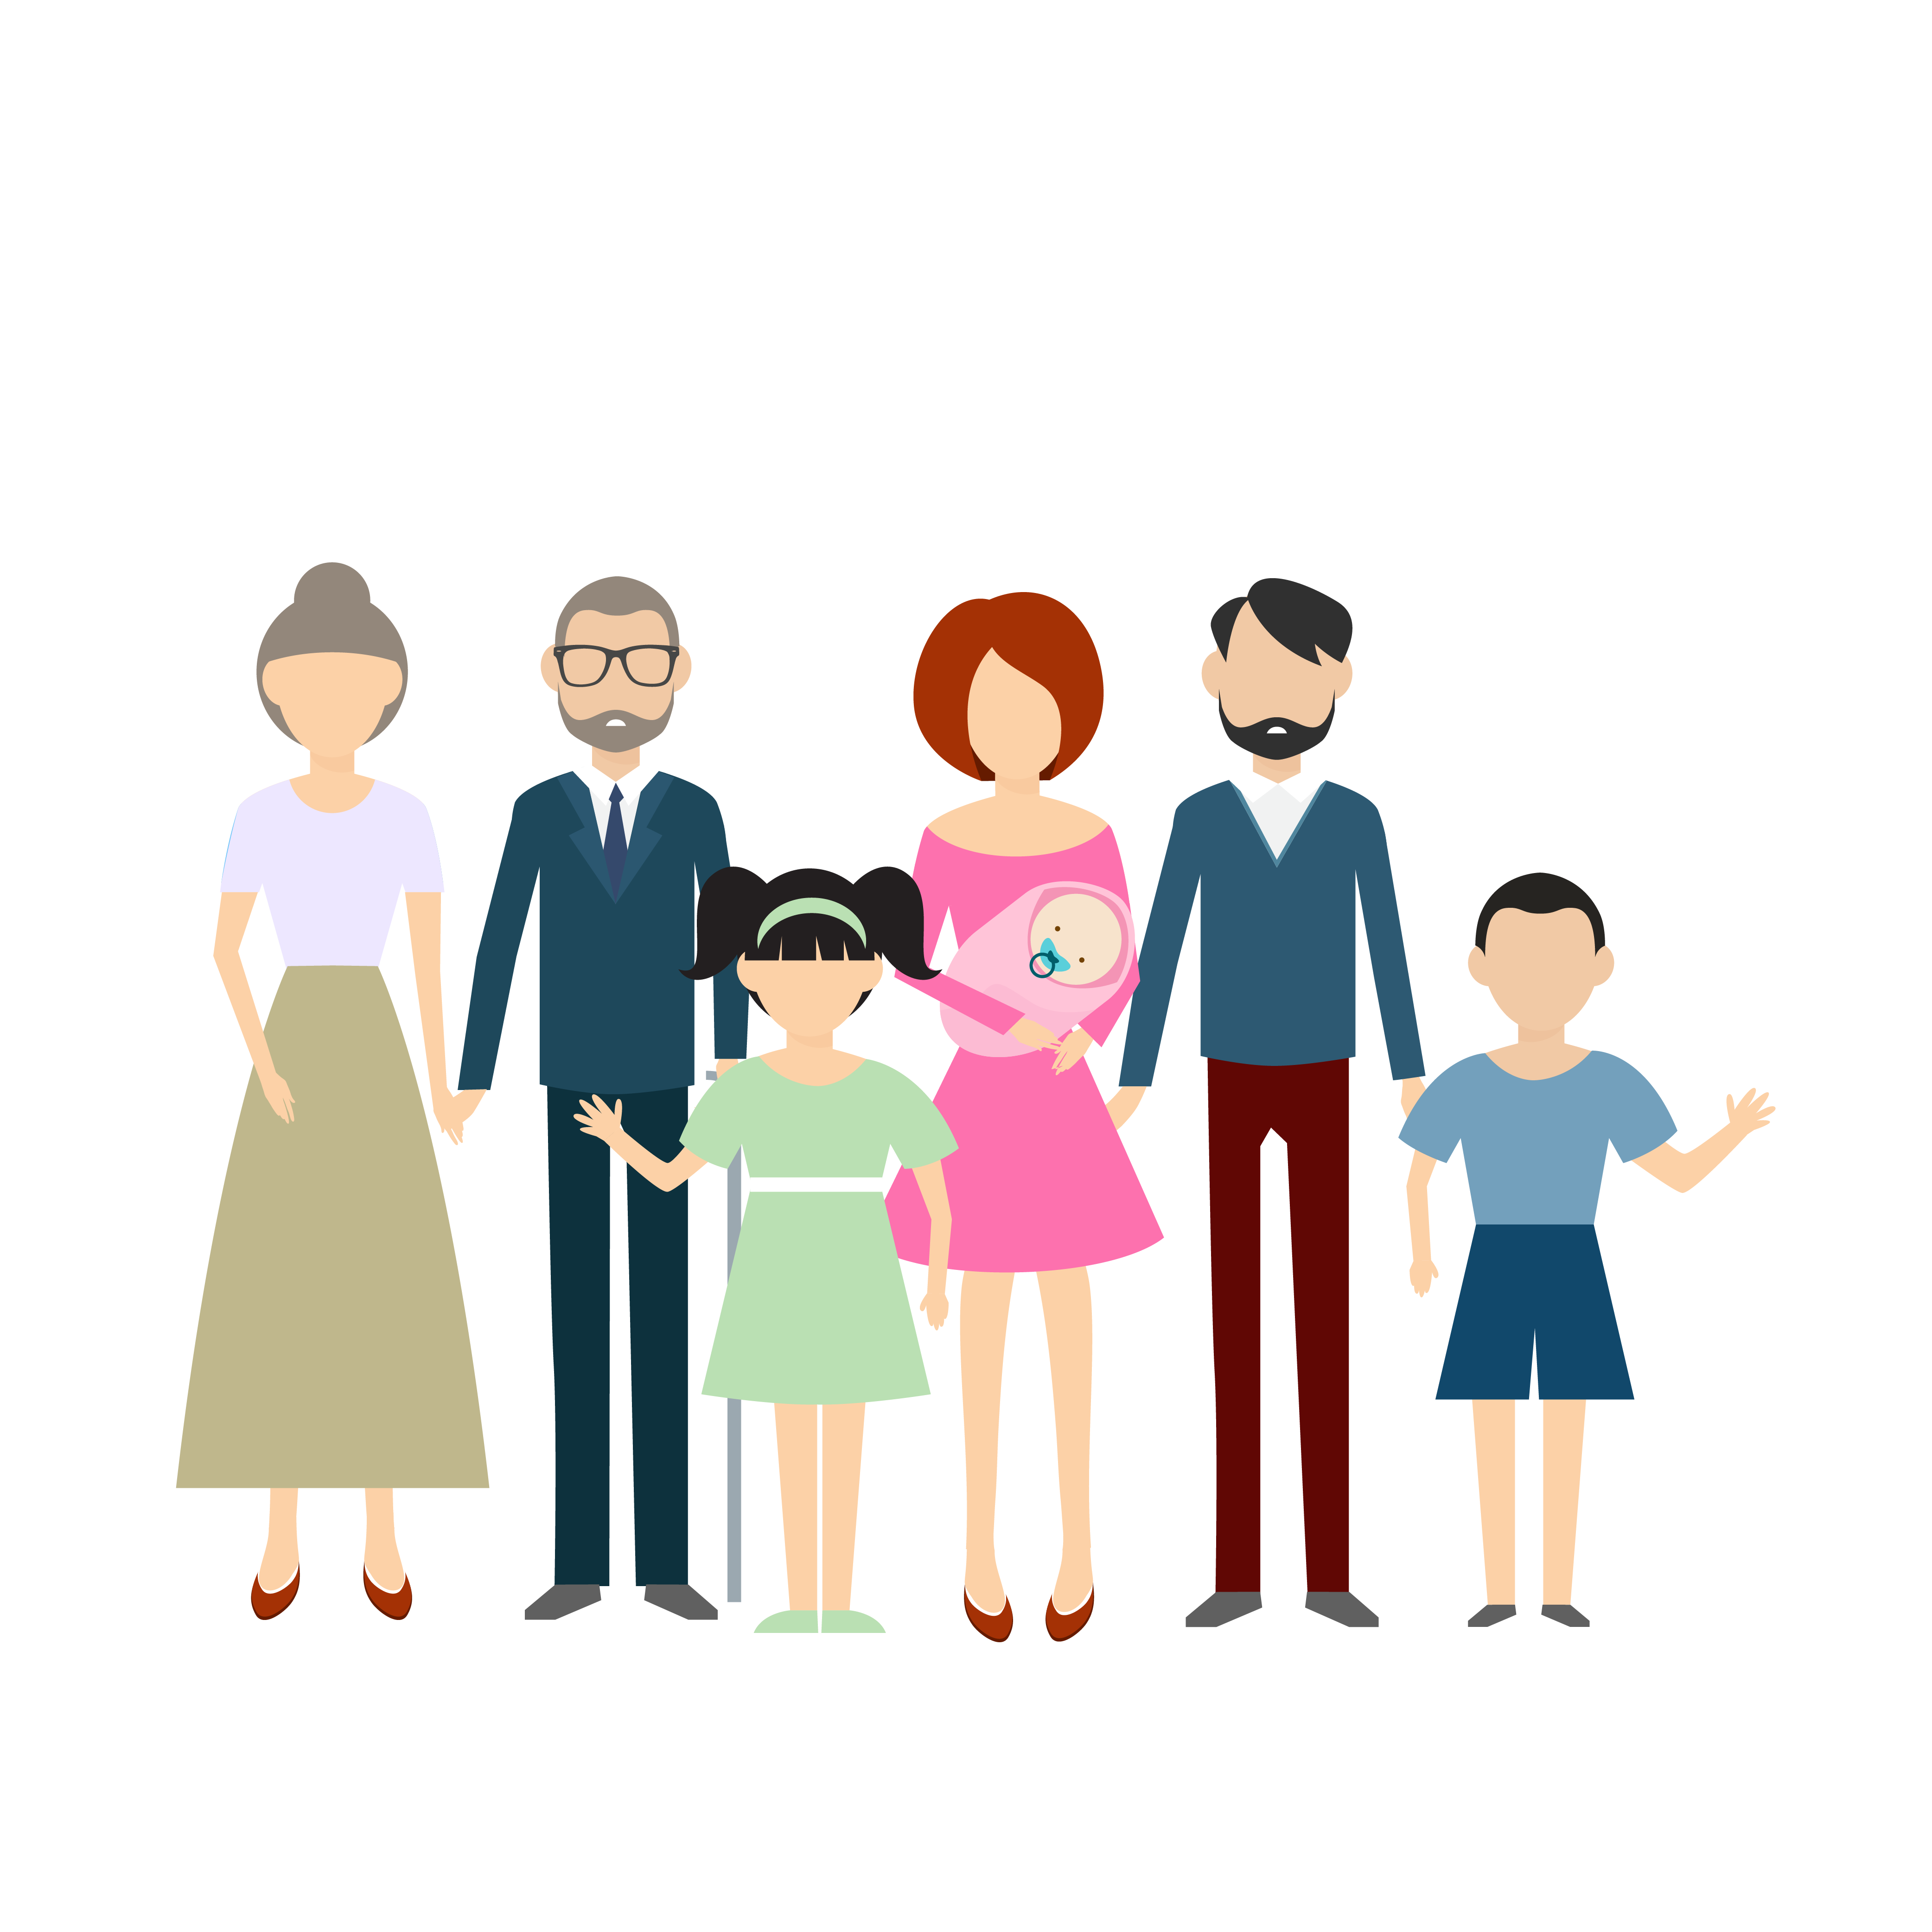 Family Vector Images at GetDrawings | Free download